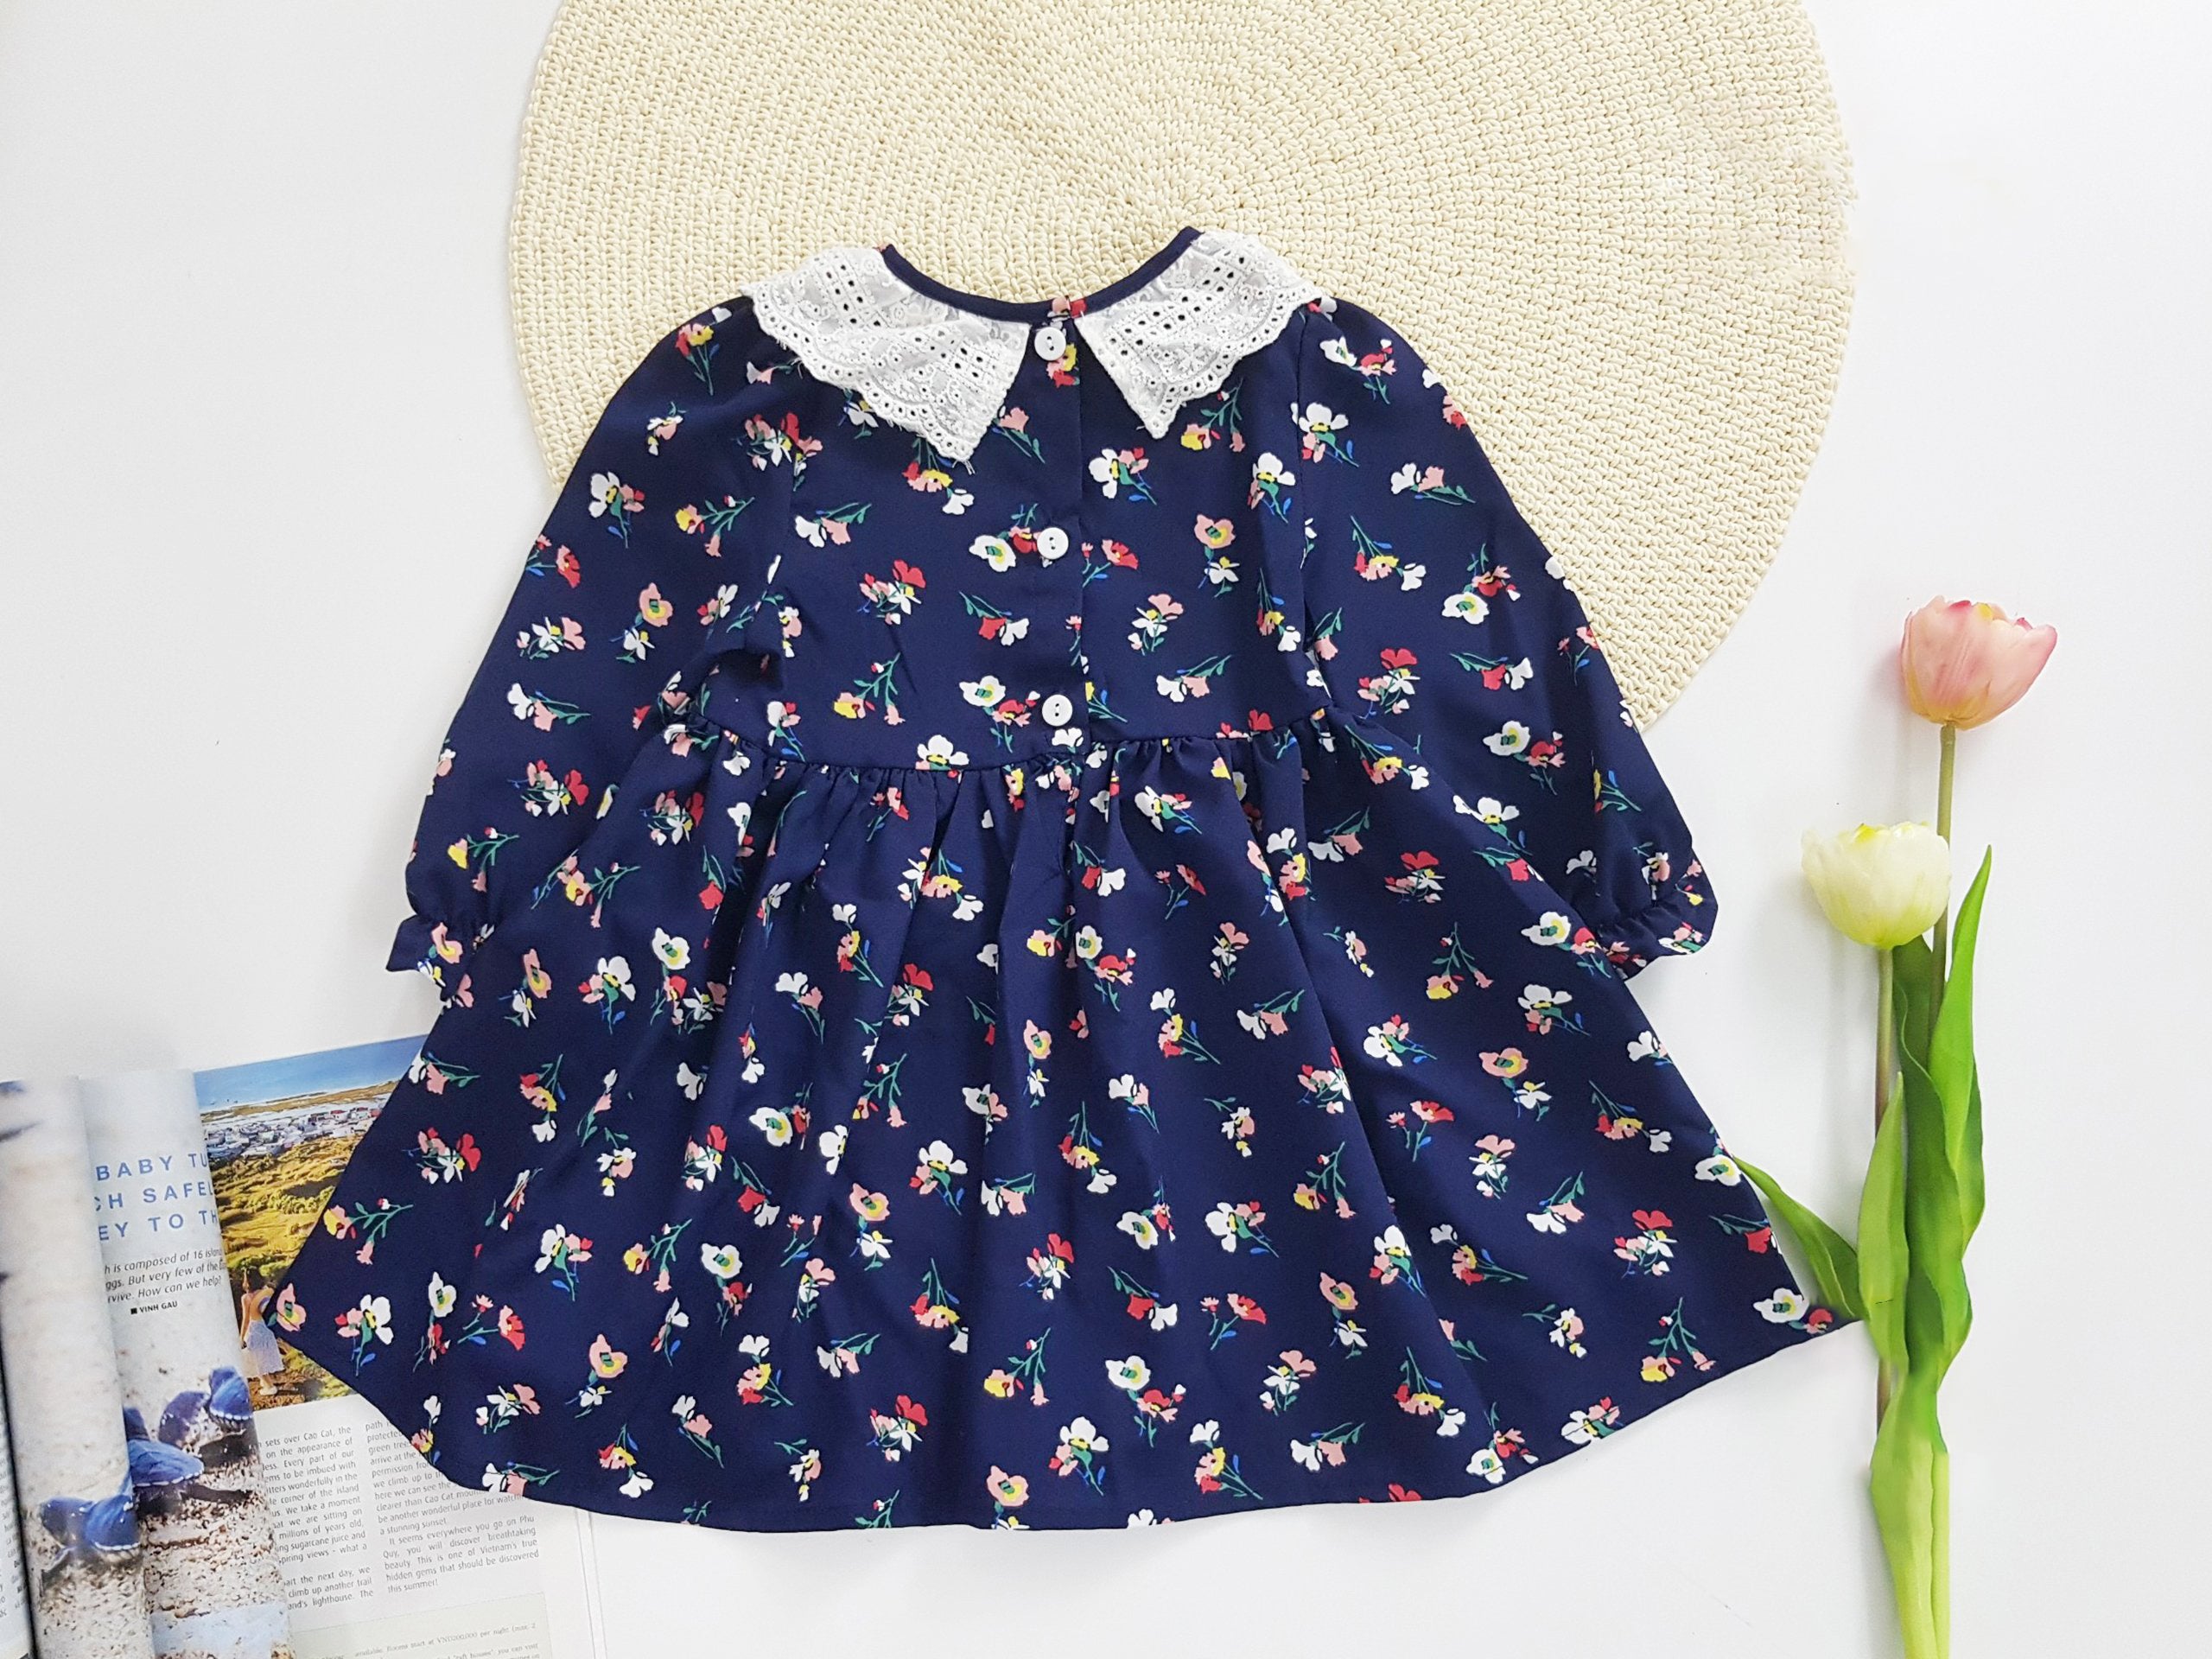 Baby Toddler Little Girls Fall Winter Navy Floral Lace Pleated Dress - Navy - Angeline Kids